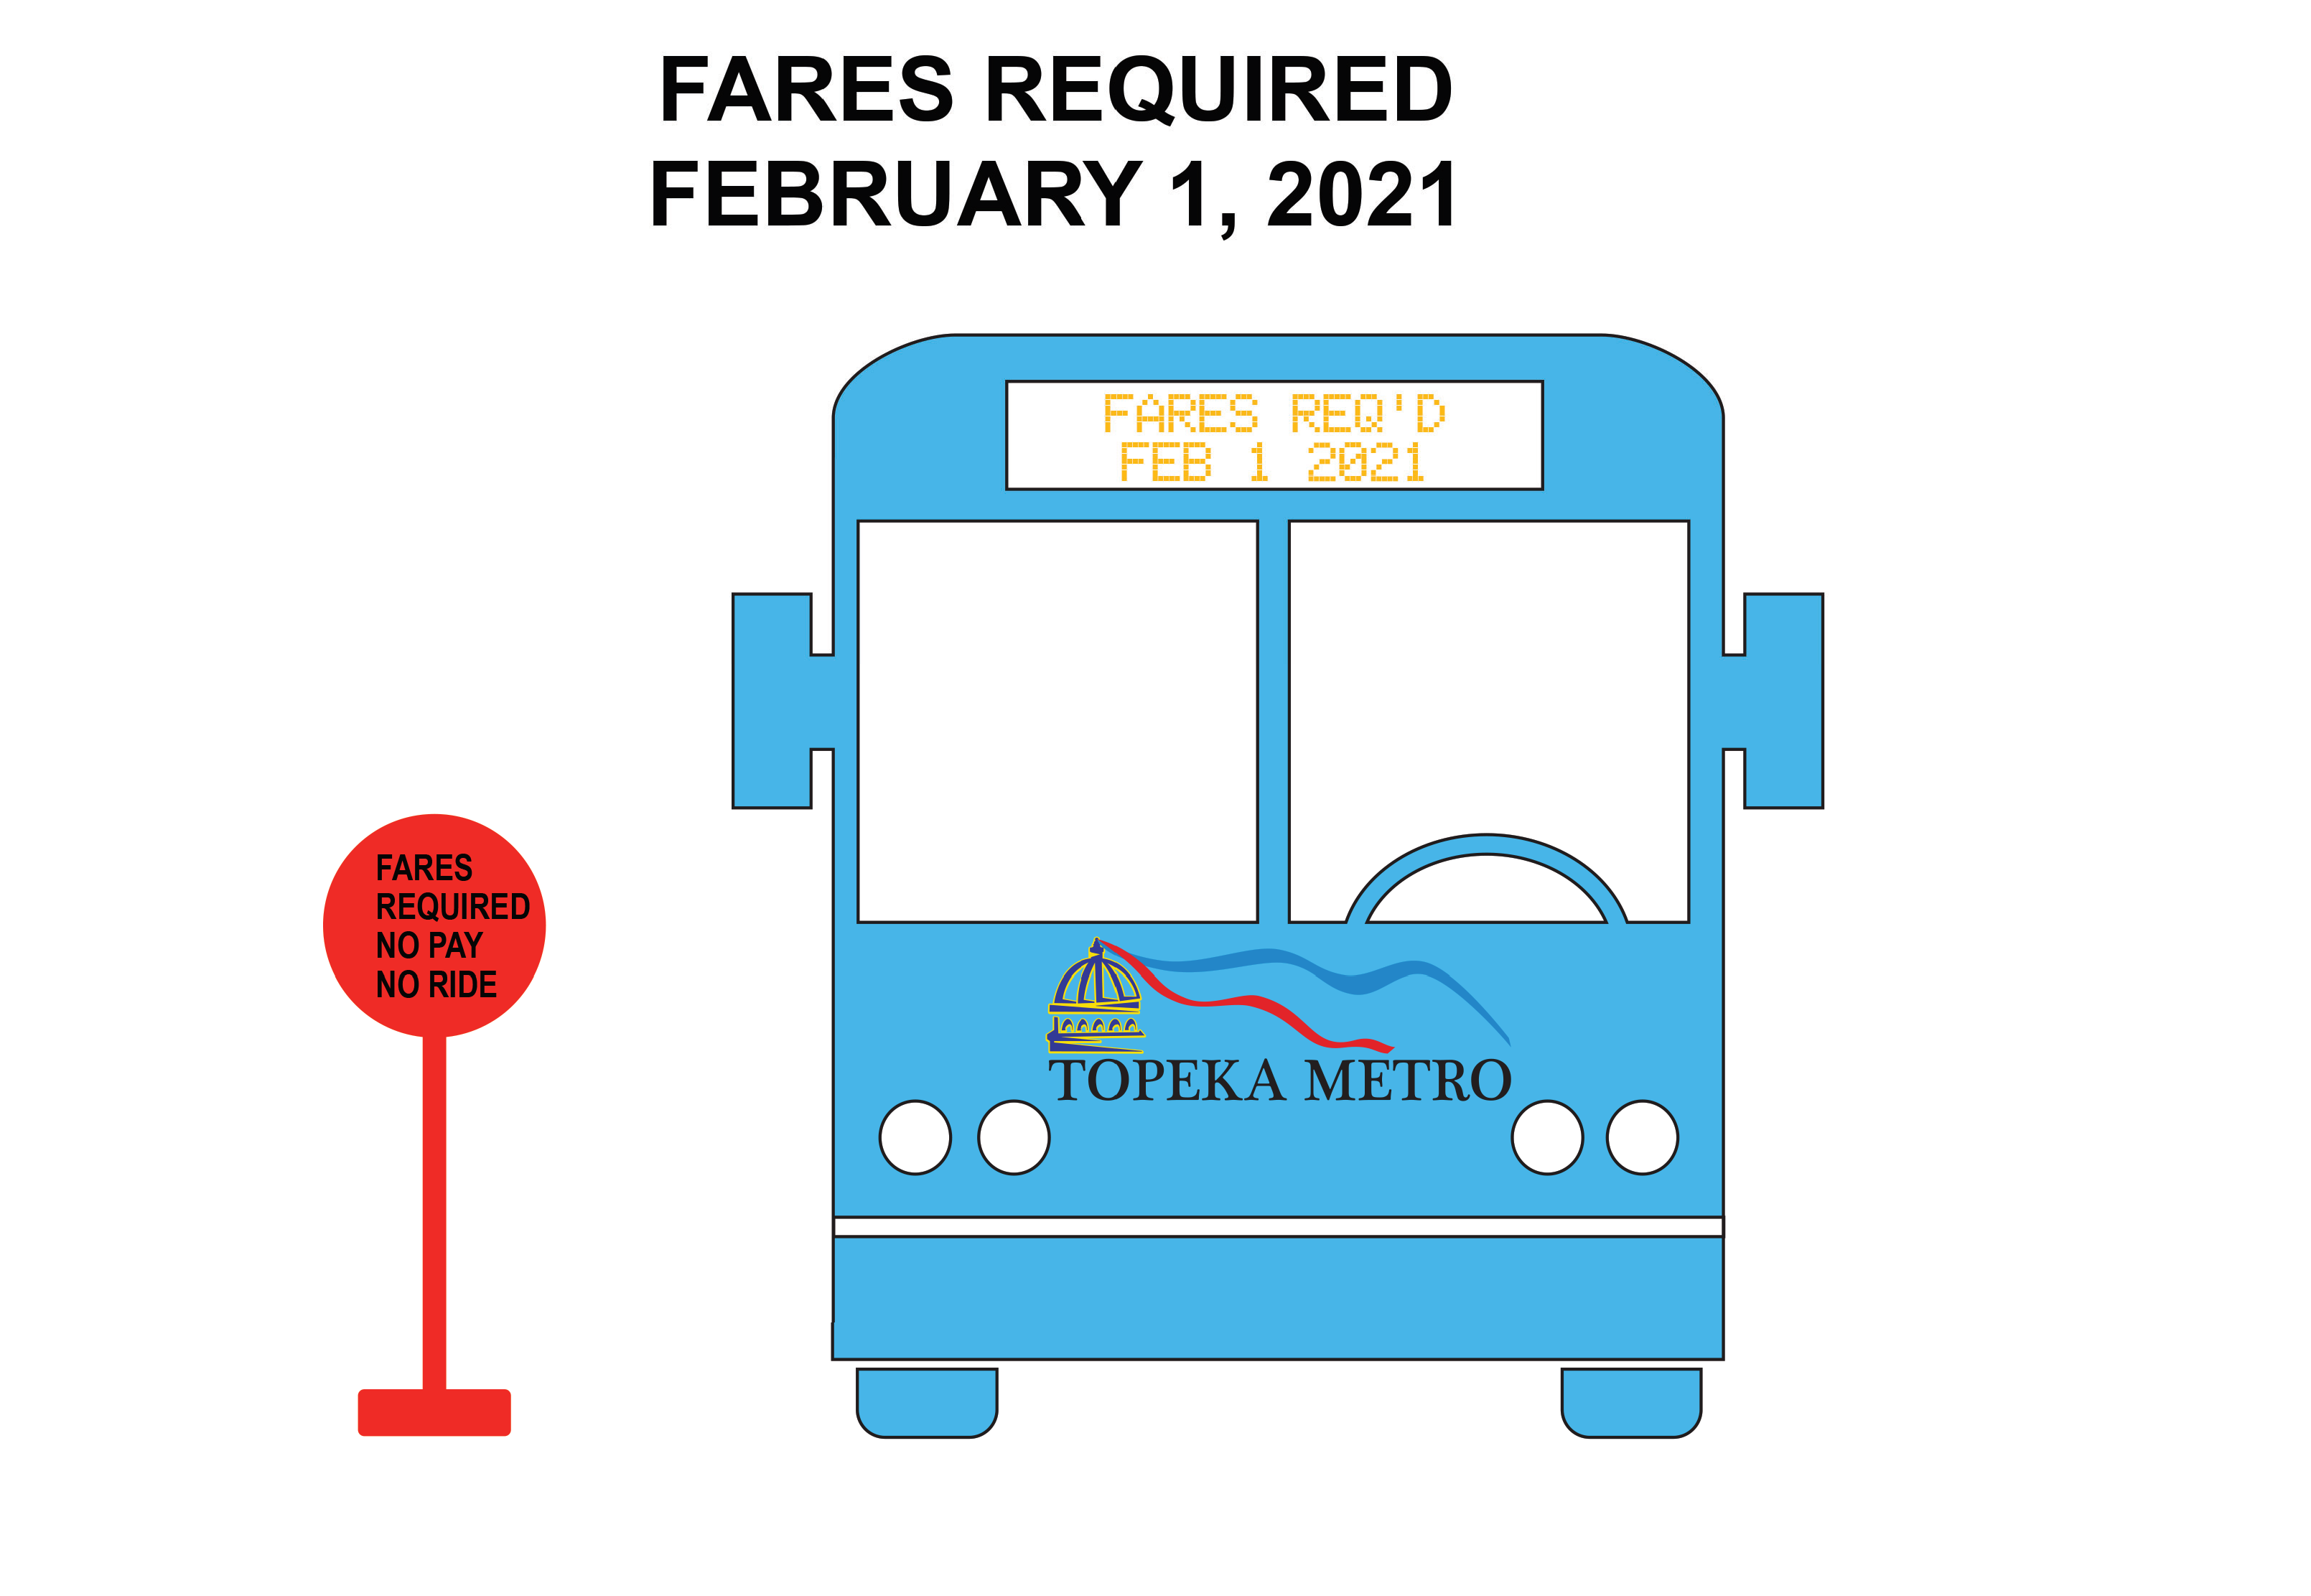 All bus fares reinstated February 1, 2021